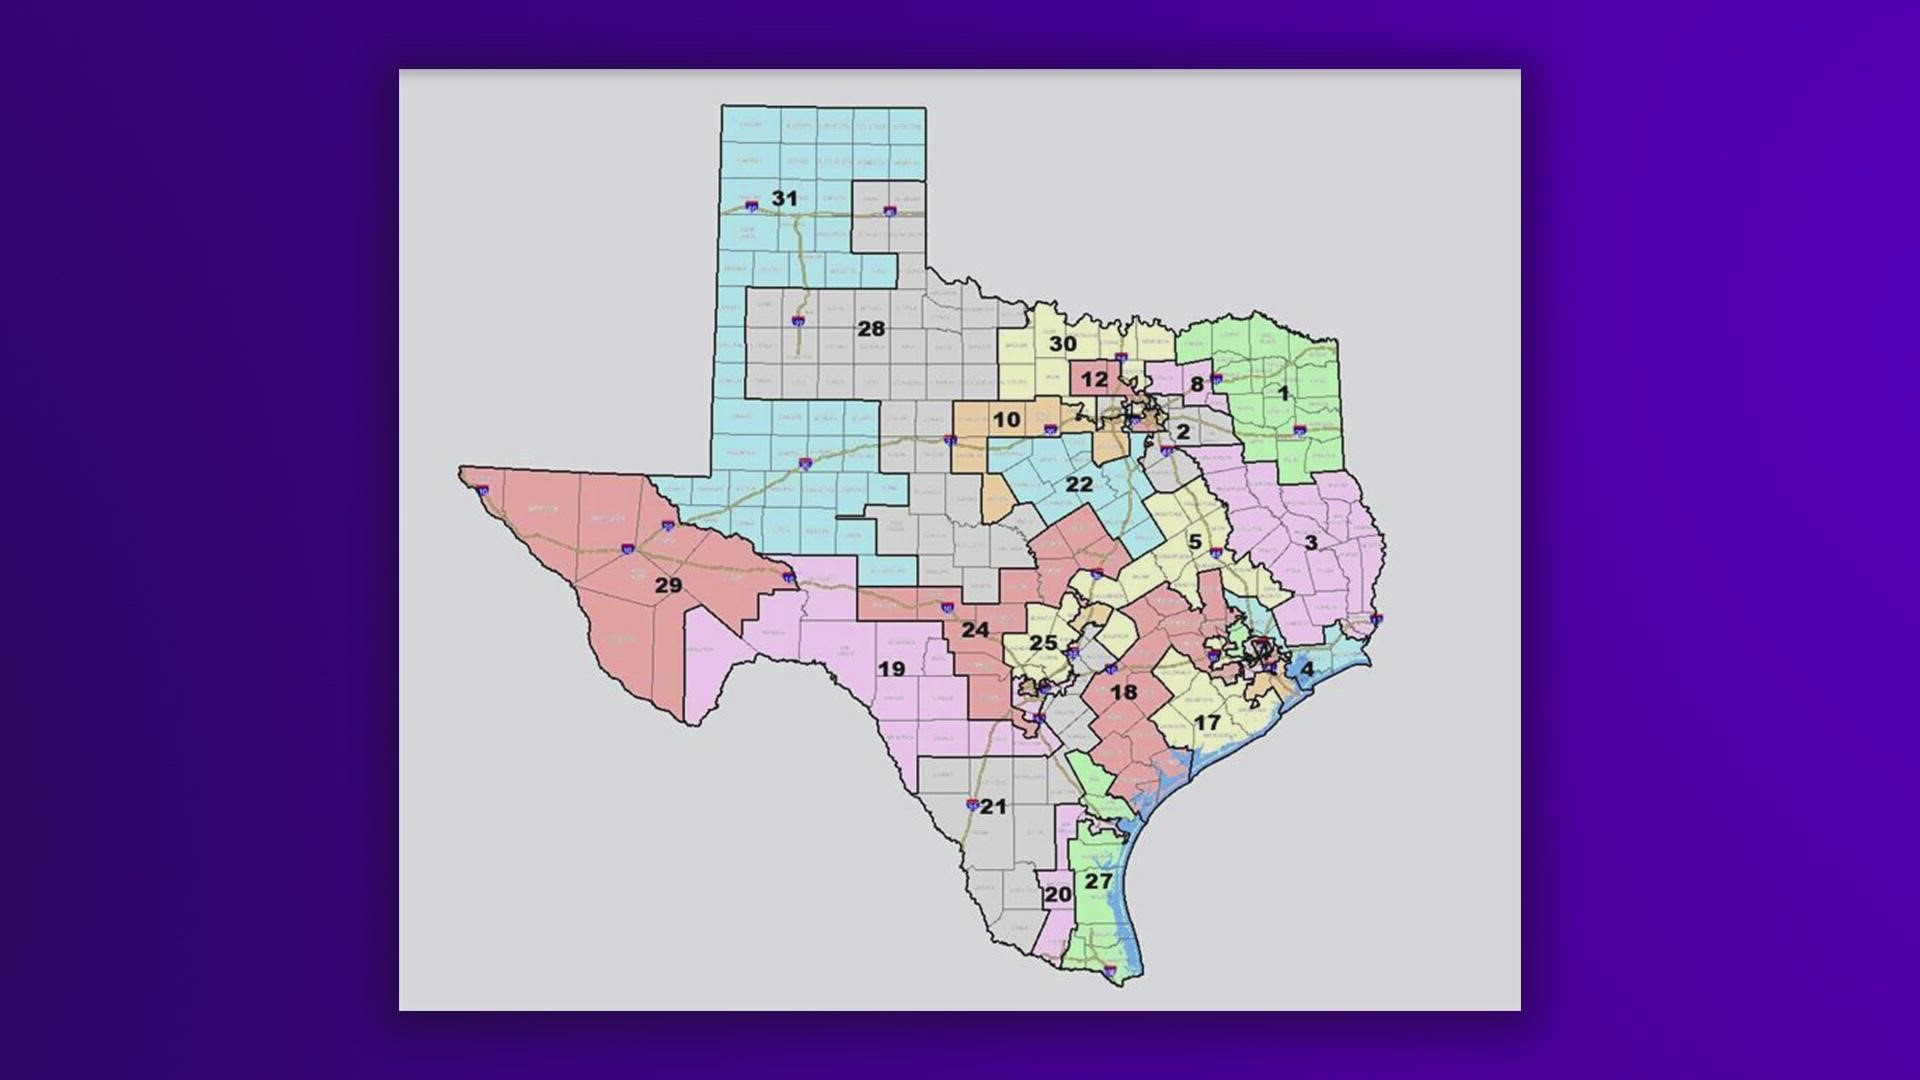 On Monday, the U.S. Supreme Court dismissed a lawsuit challenging the newly-drawn Texas Senate district map.